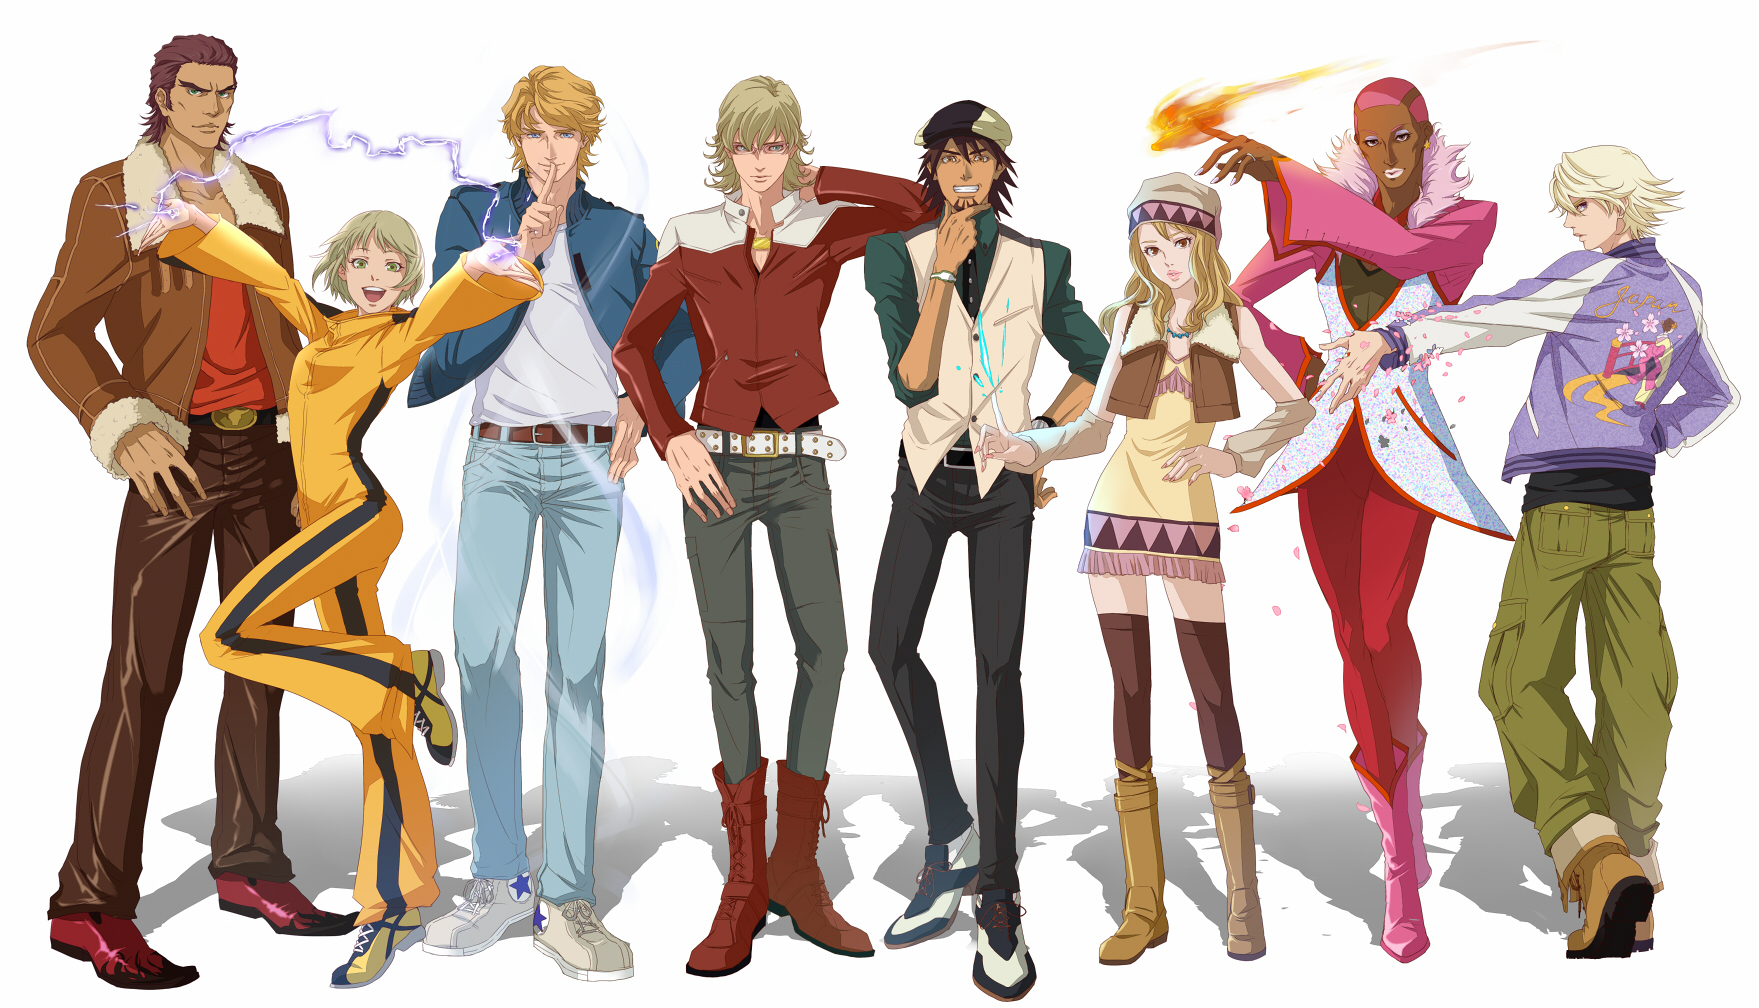 Tiger & Bunny Backgrounds, Compatible - PC, Mobile, Gadgets| 1759x1008 px